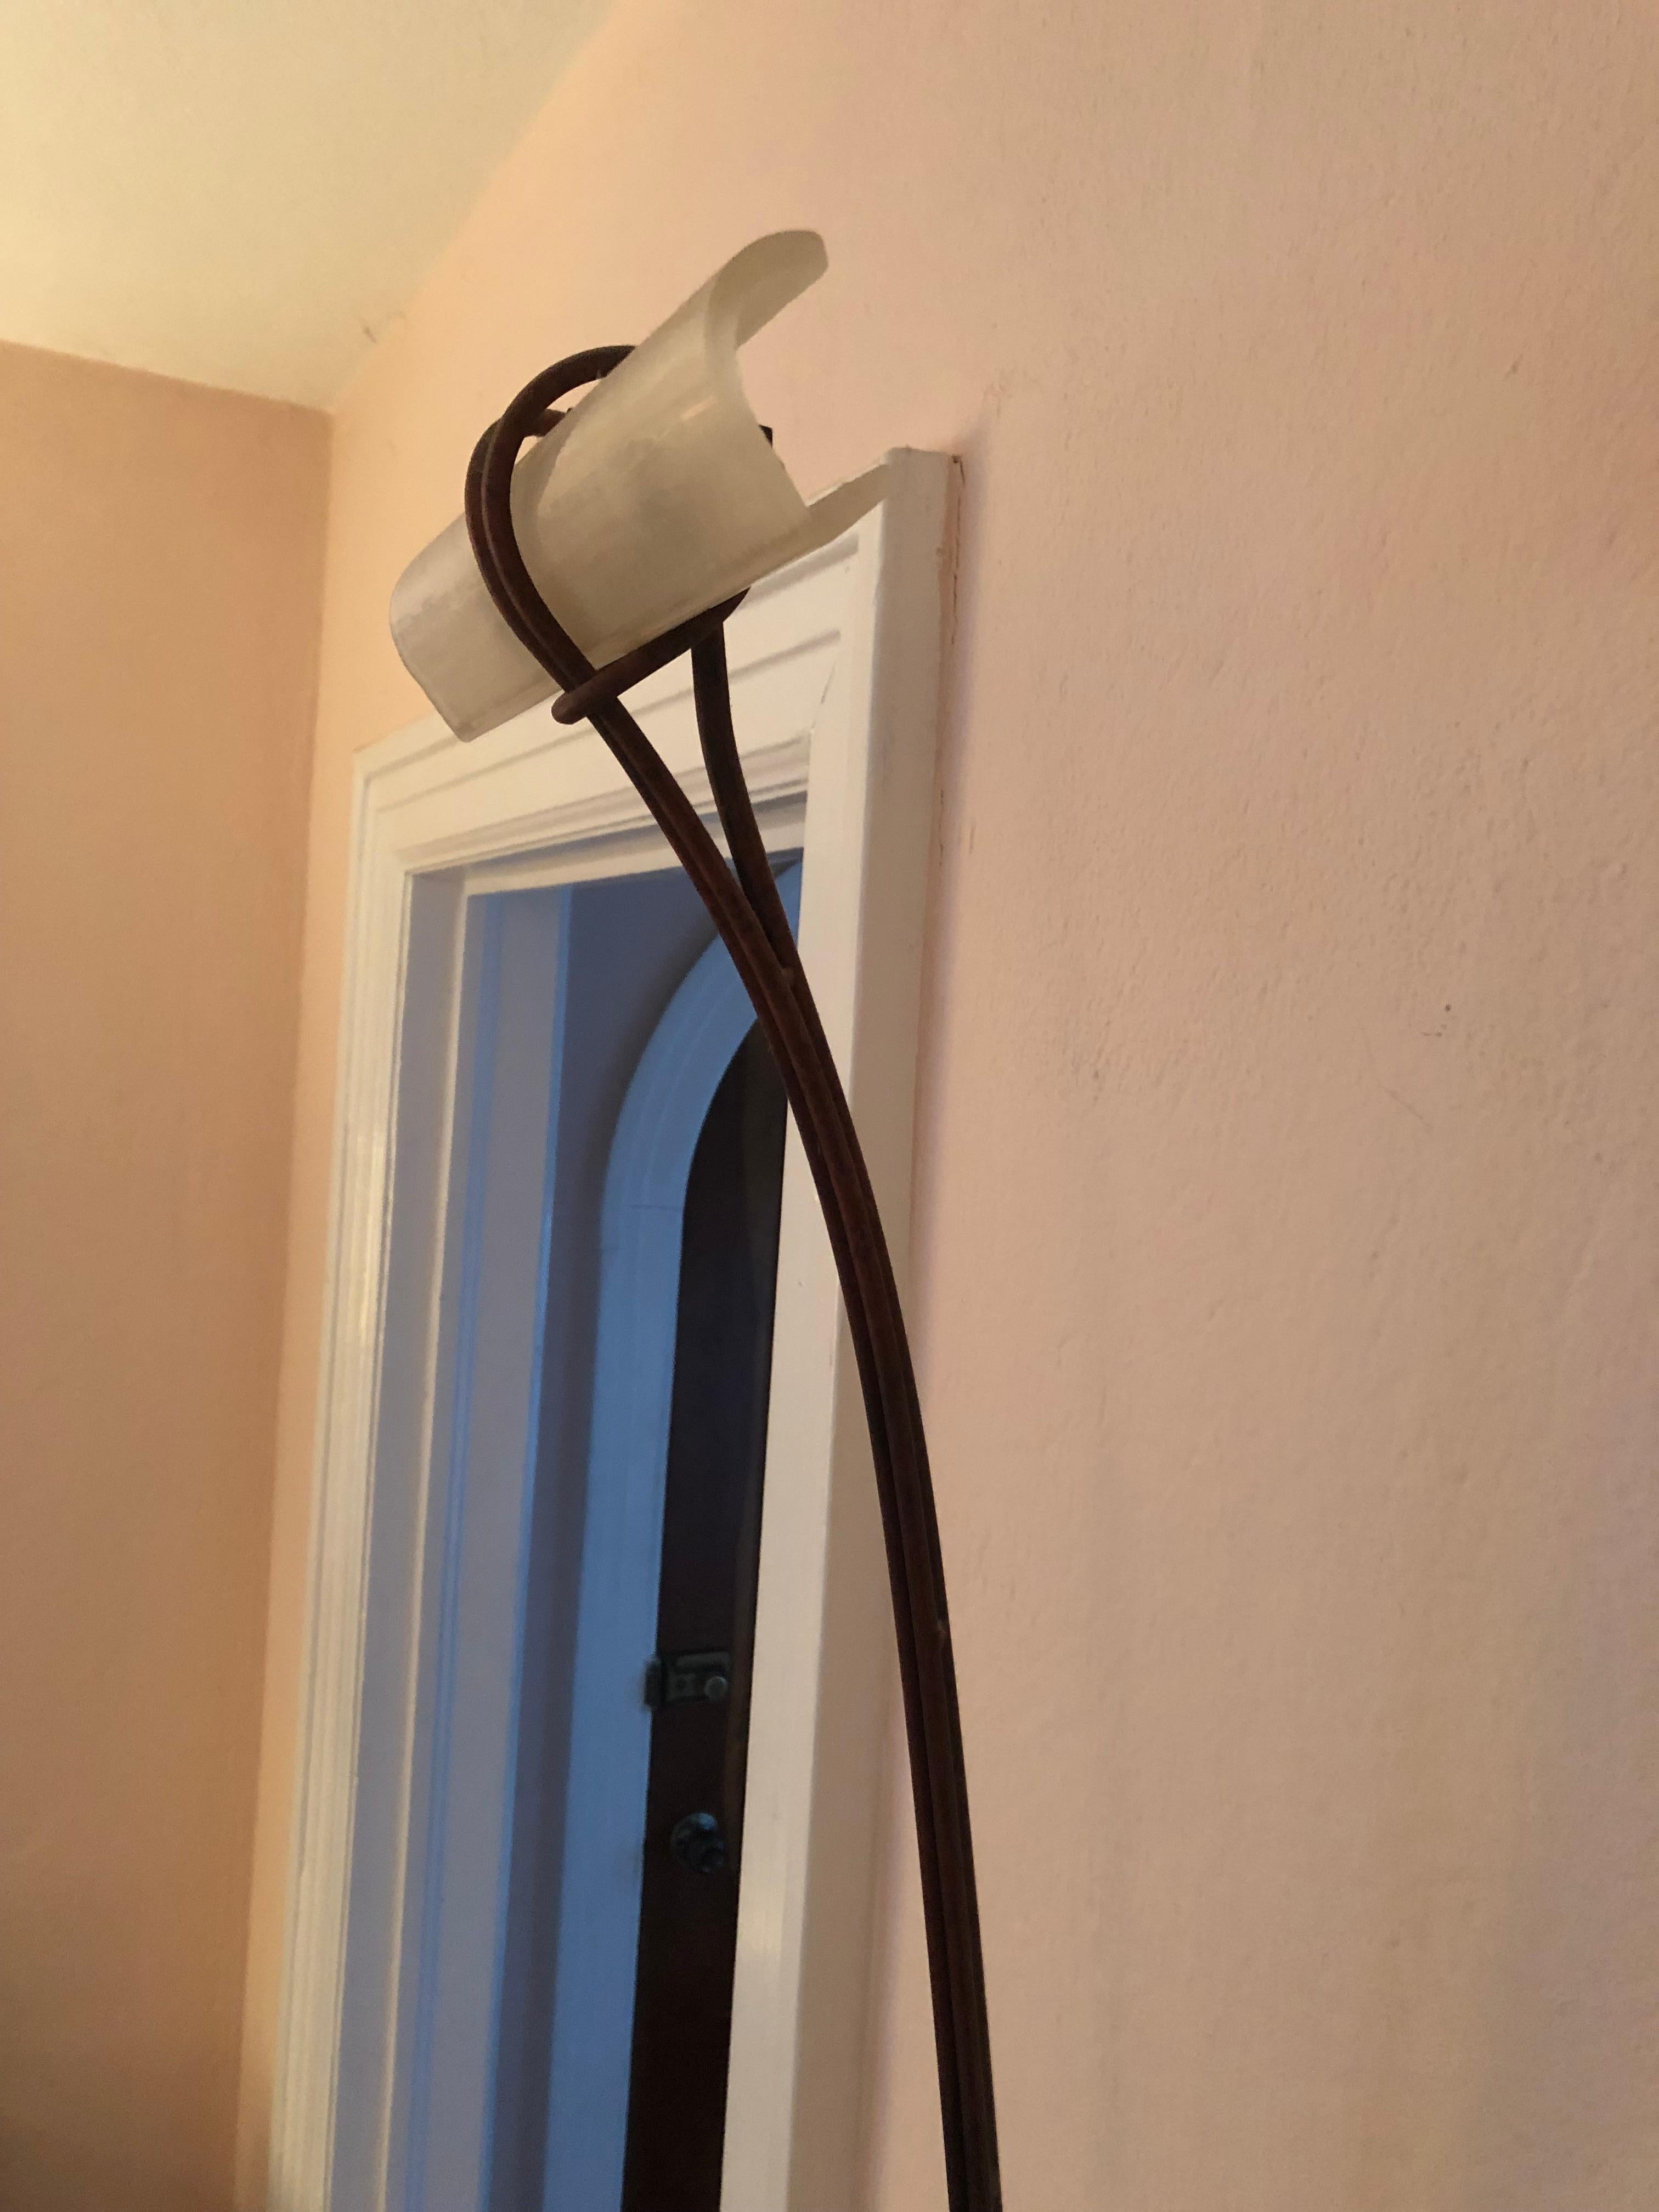 Super chic Italian bronze patina elongated wall sconce having sinuous Silhouette and frosted glass horizontal shade at the top, circa 1990
The top is 9 w
The bronze plate at the bottom is 3.25 w x 2 h
Takes a Halogen bulb.